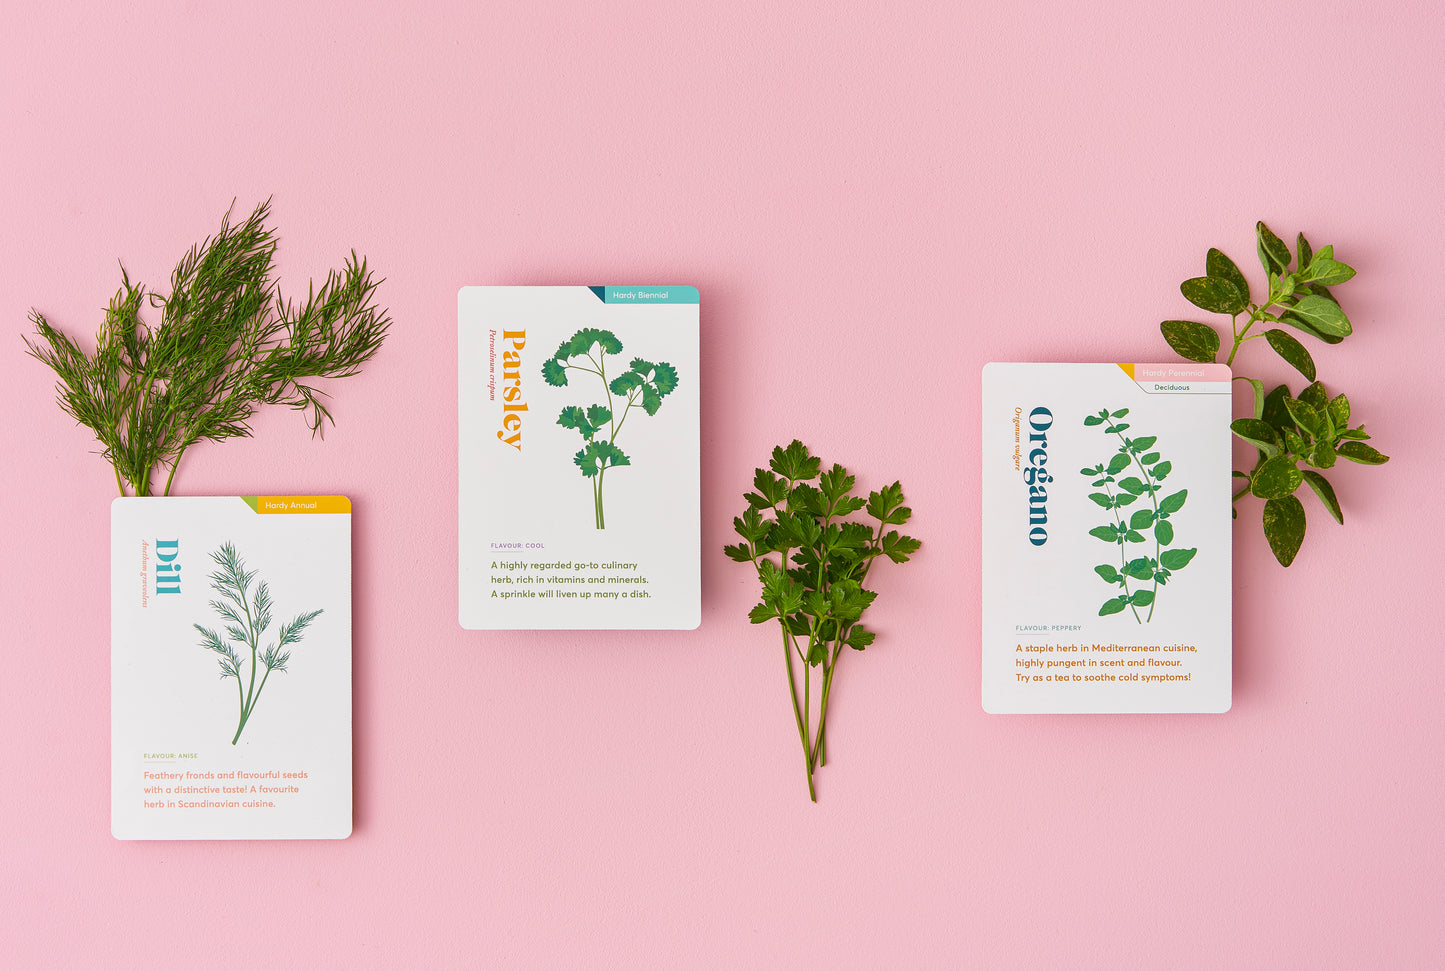 Another Studio | Herb Care Cards